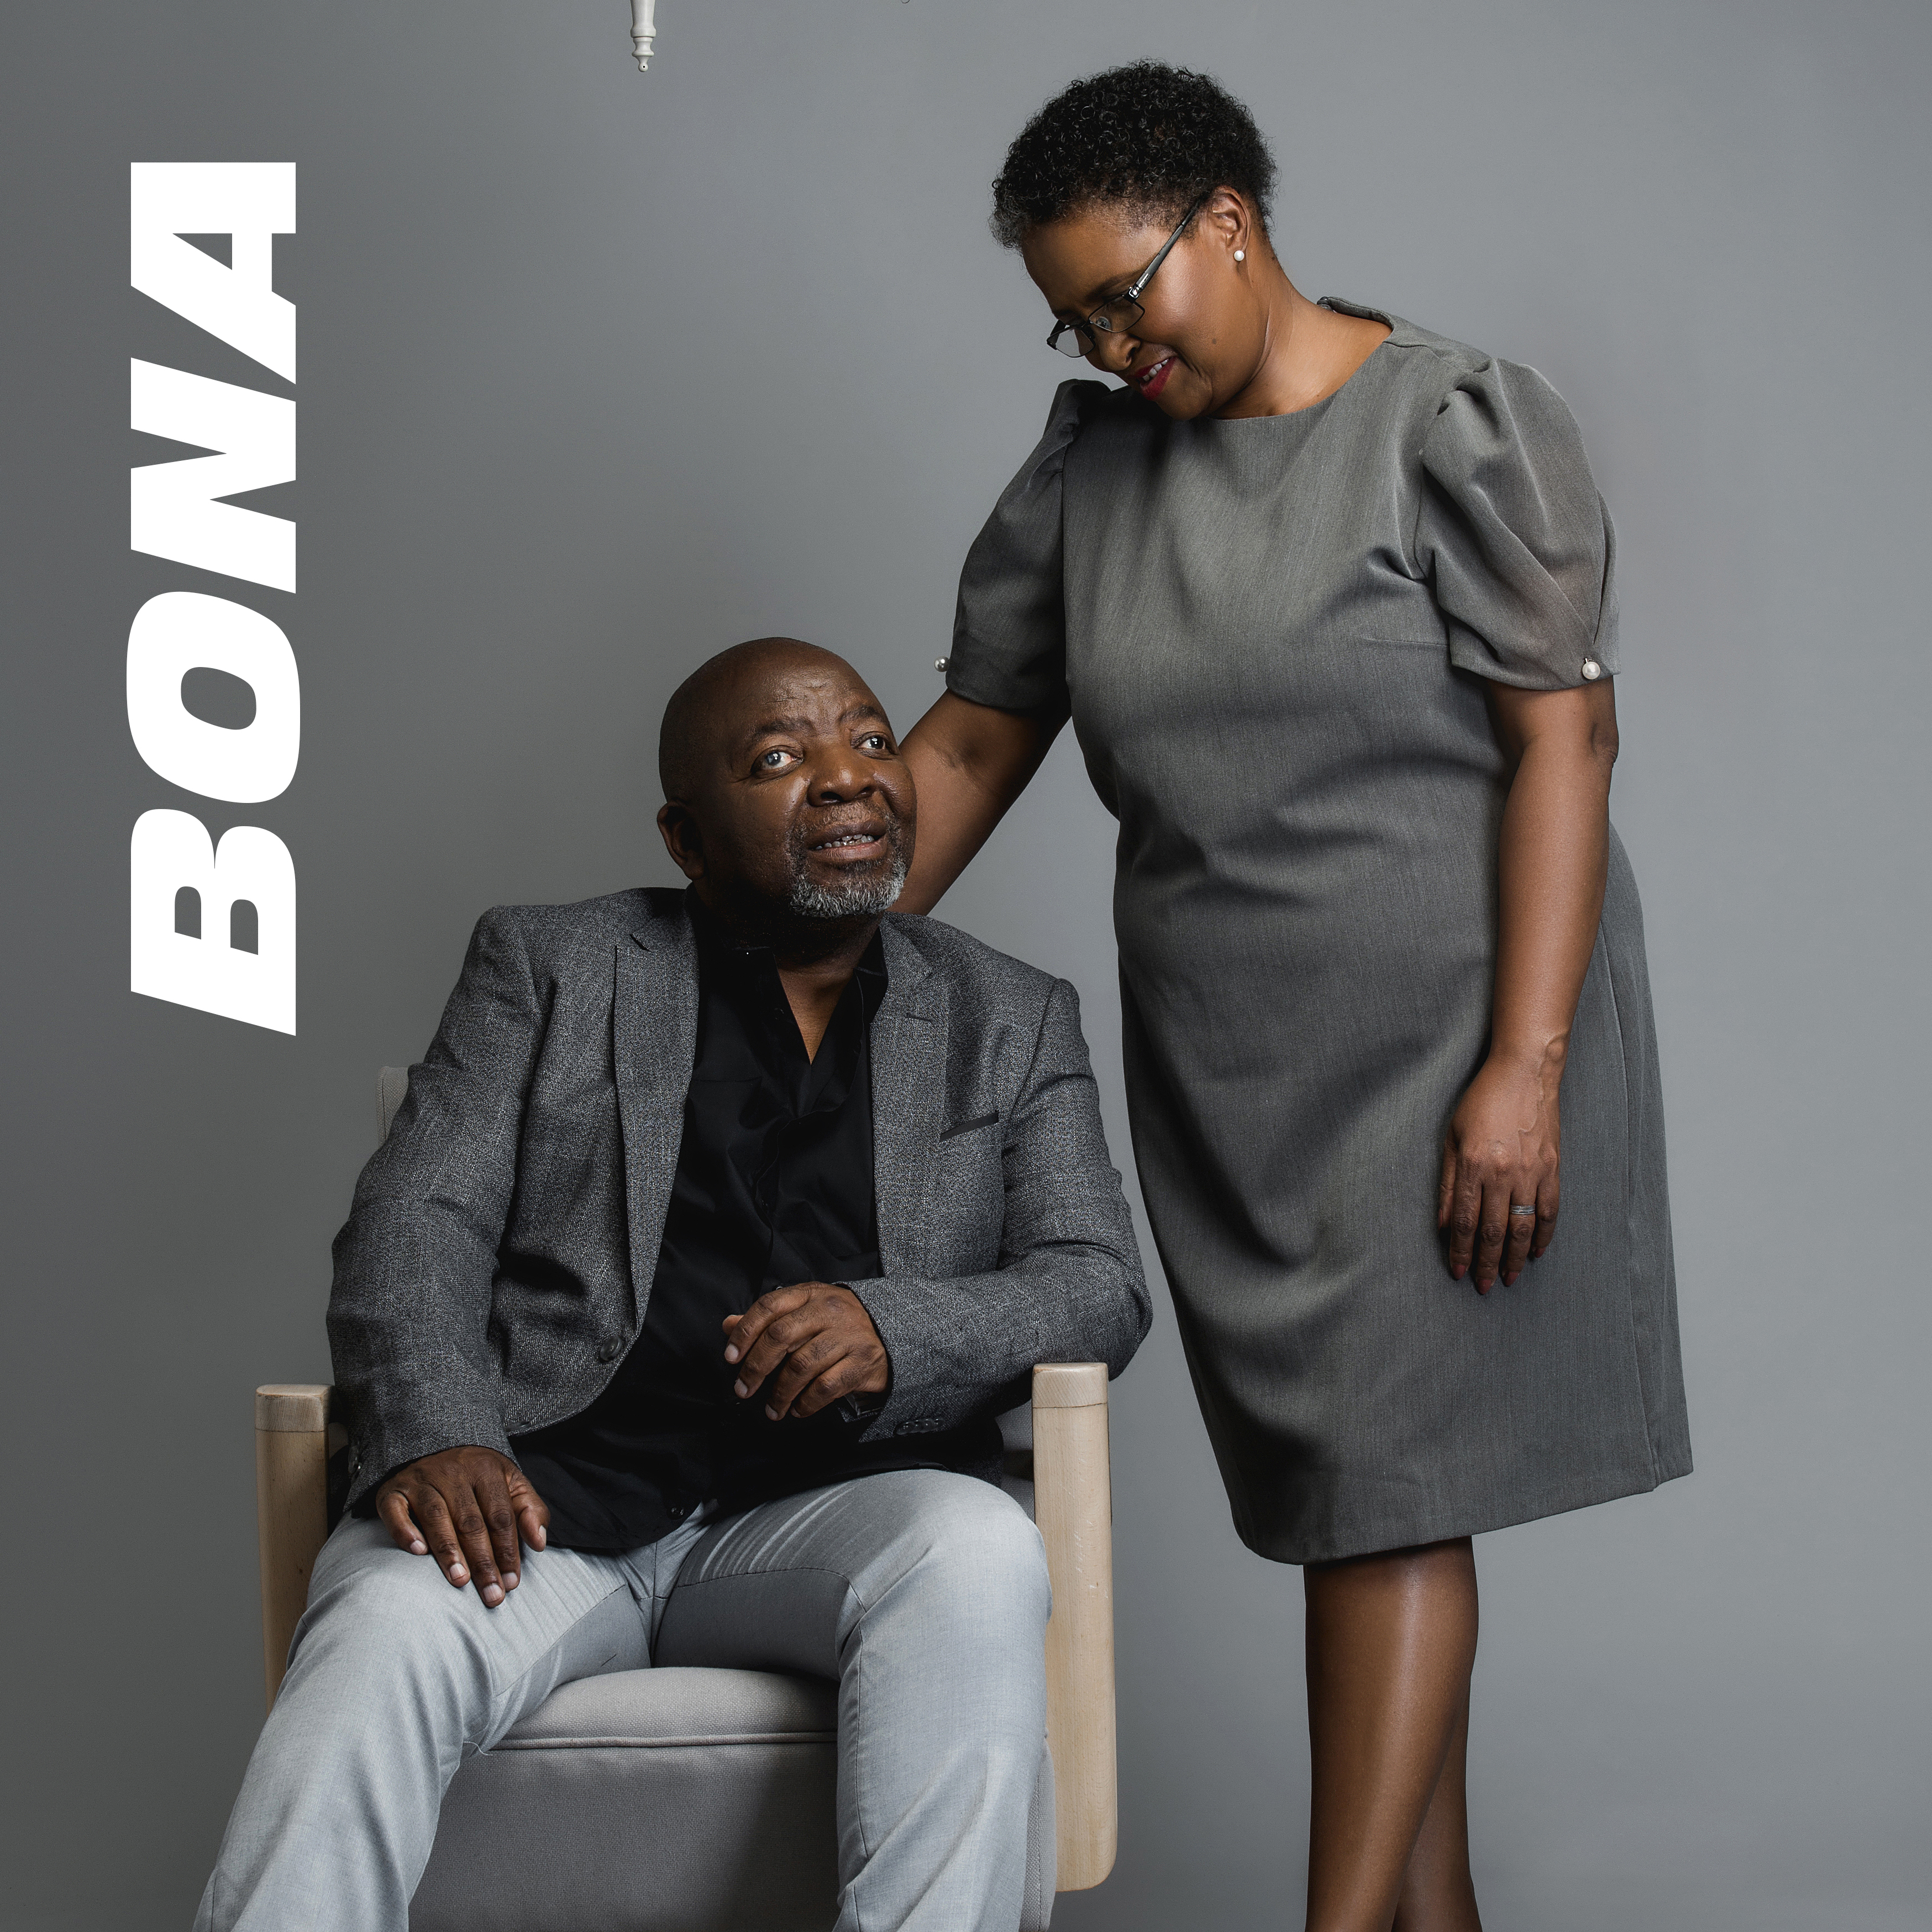 Get to know Jerry and Claudine Mofokeng